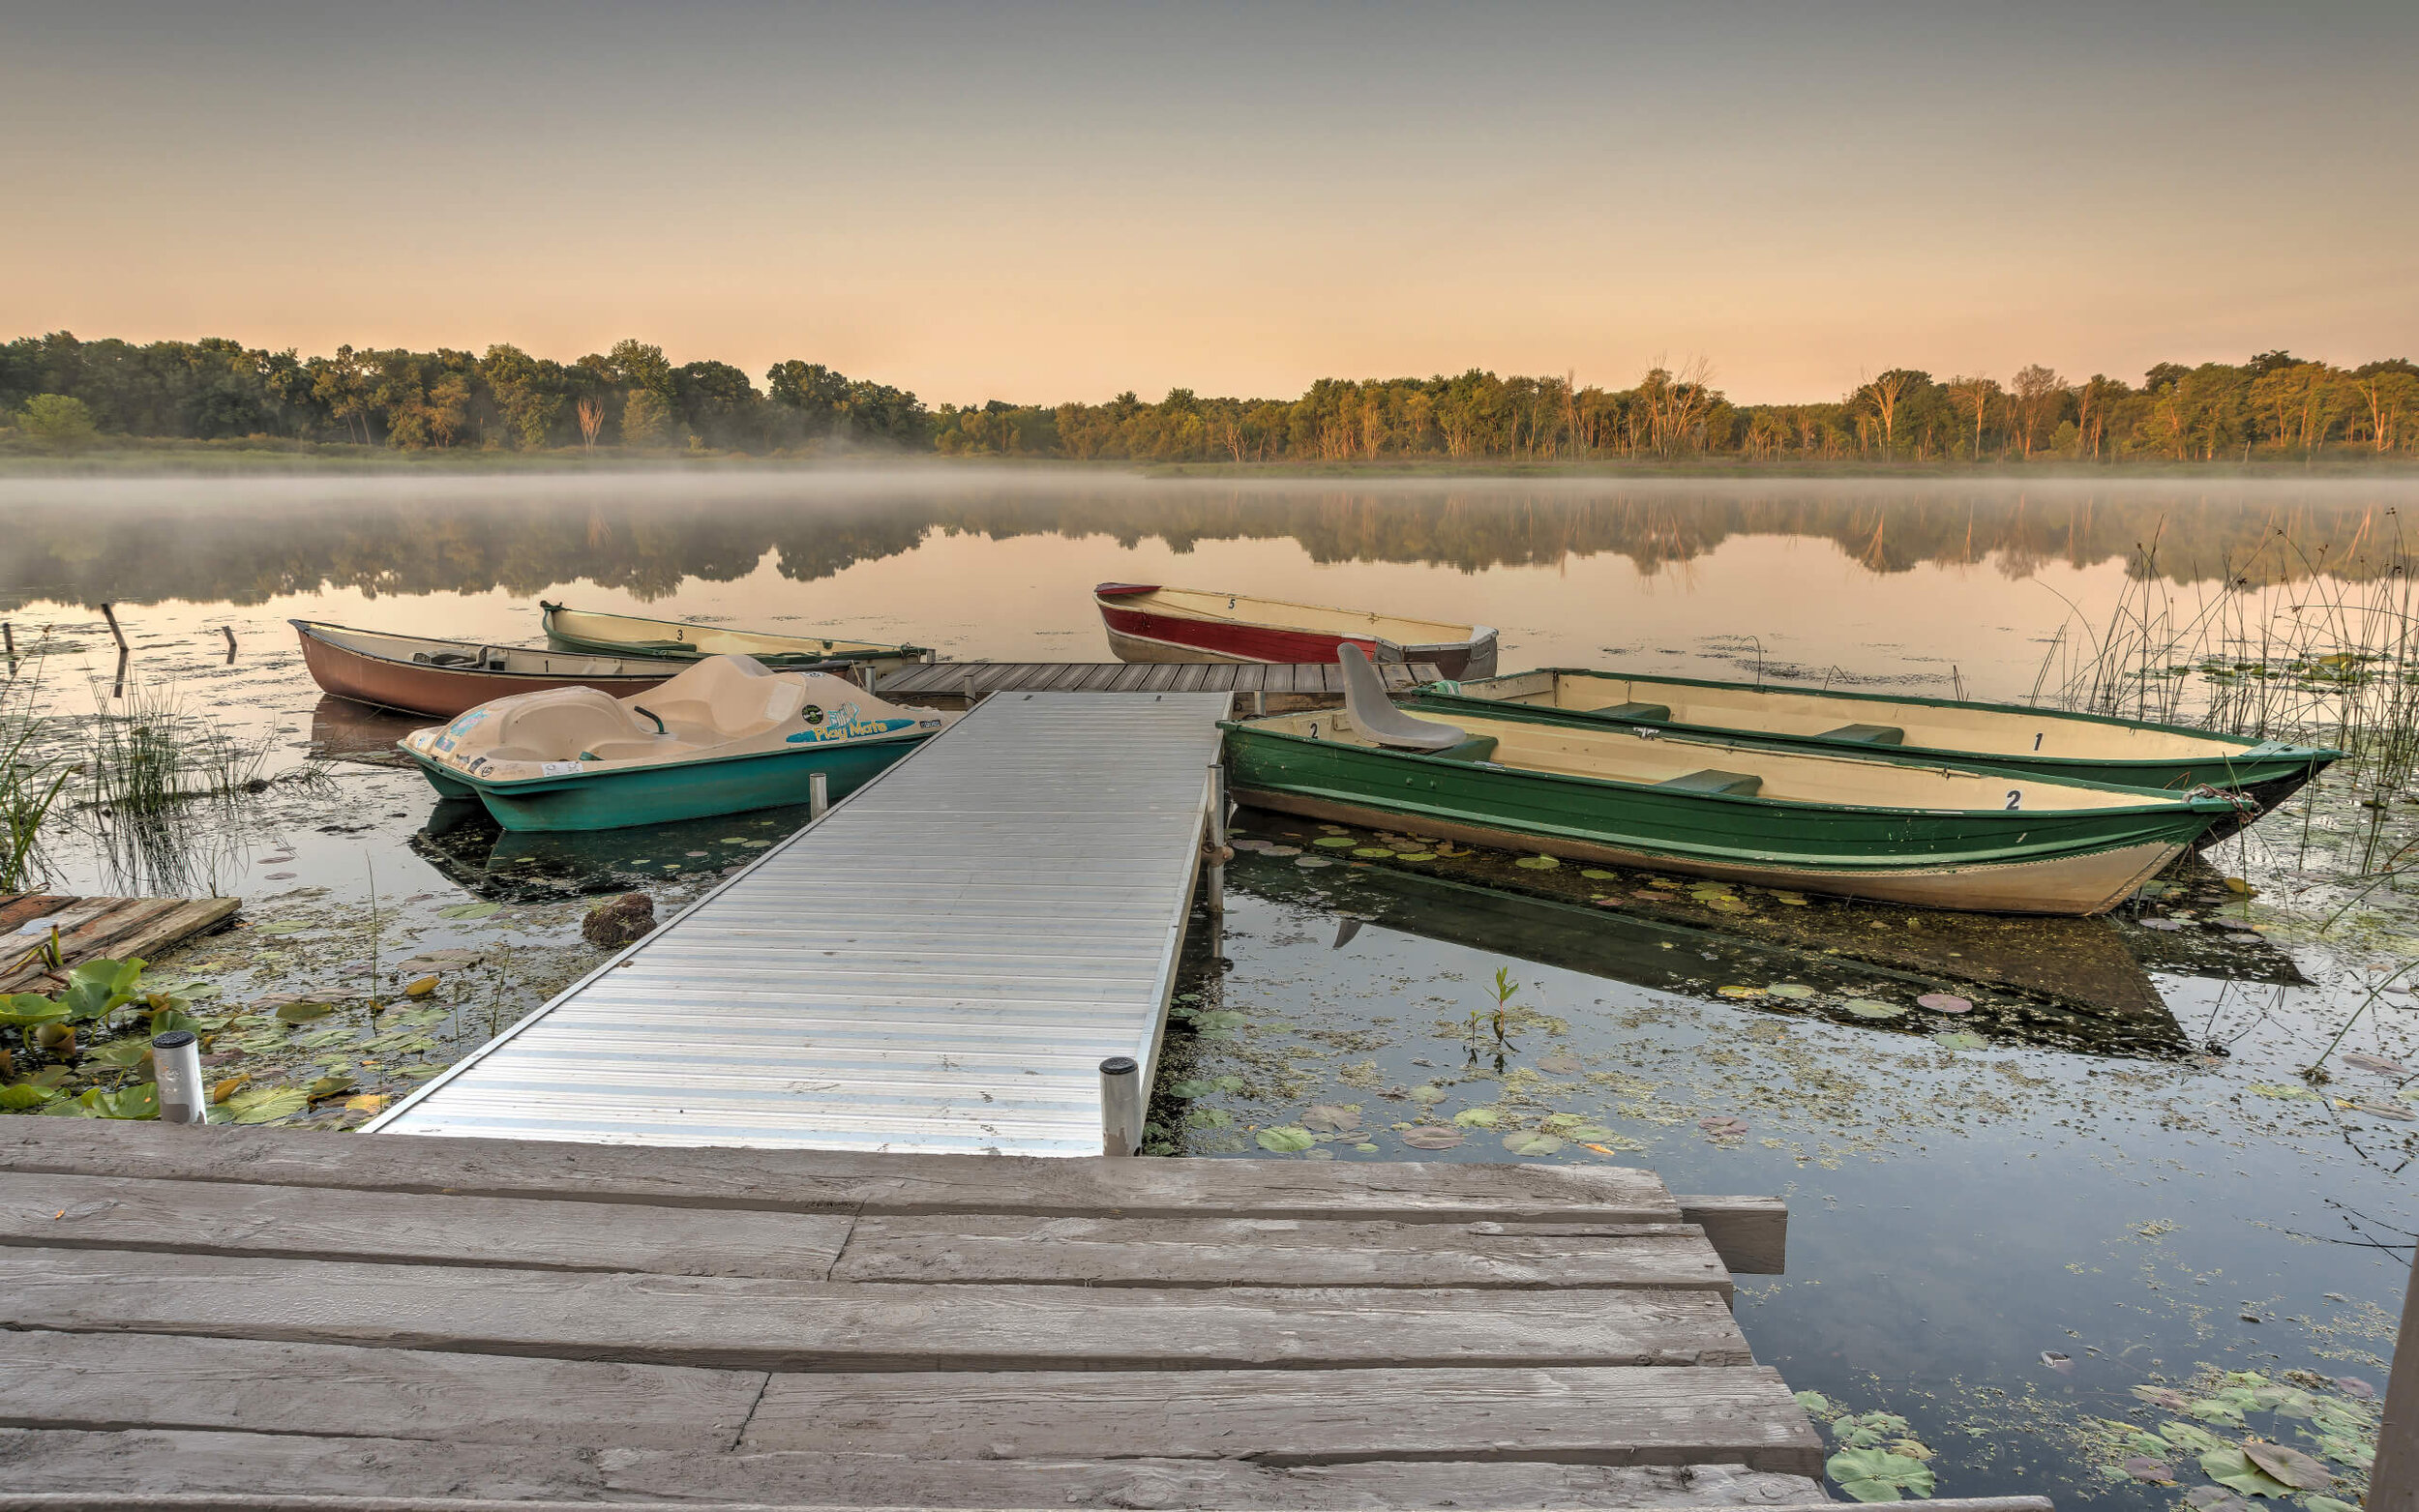 View of misty lake in morning from dock with boats.